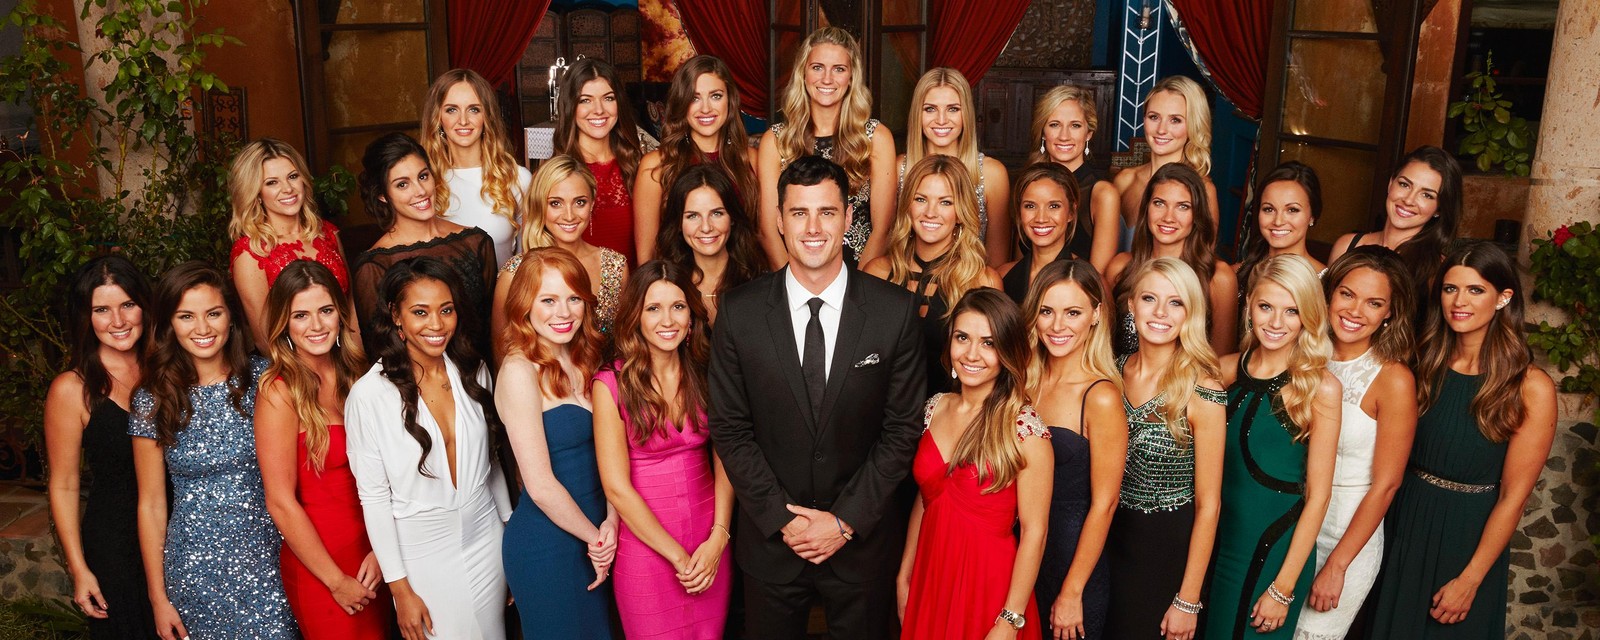 The Bachelor is casting for Season 21! 